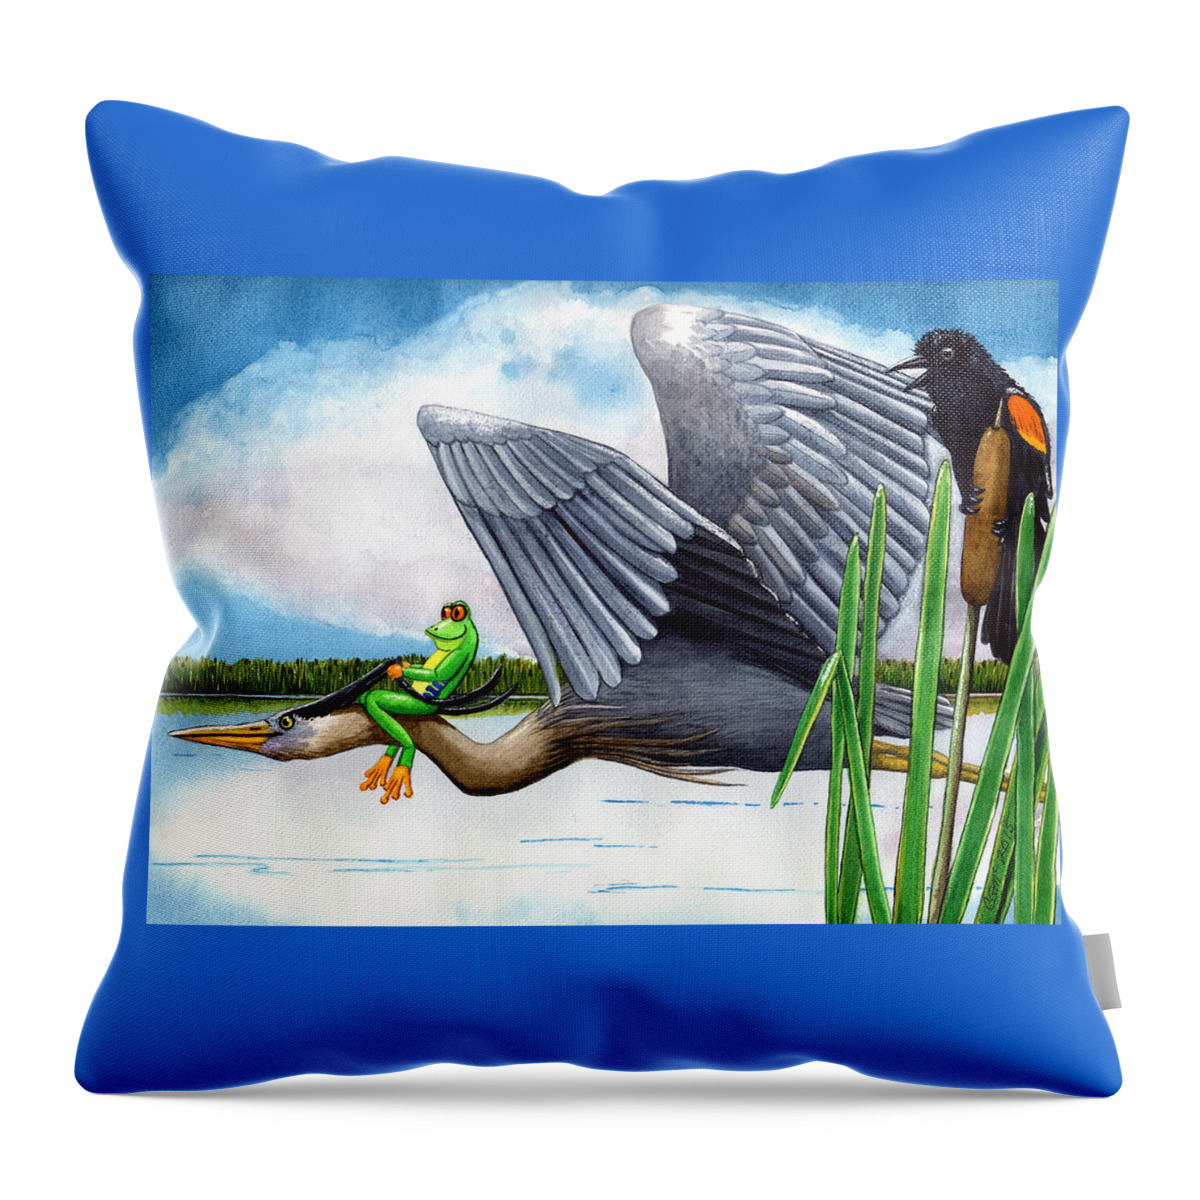 Birds Throw Pillow featuring the painting The Fly By by Catherine G McElroy